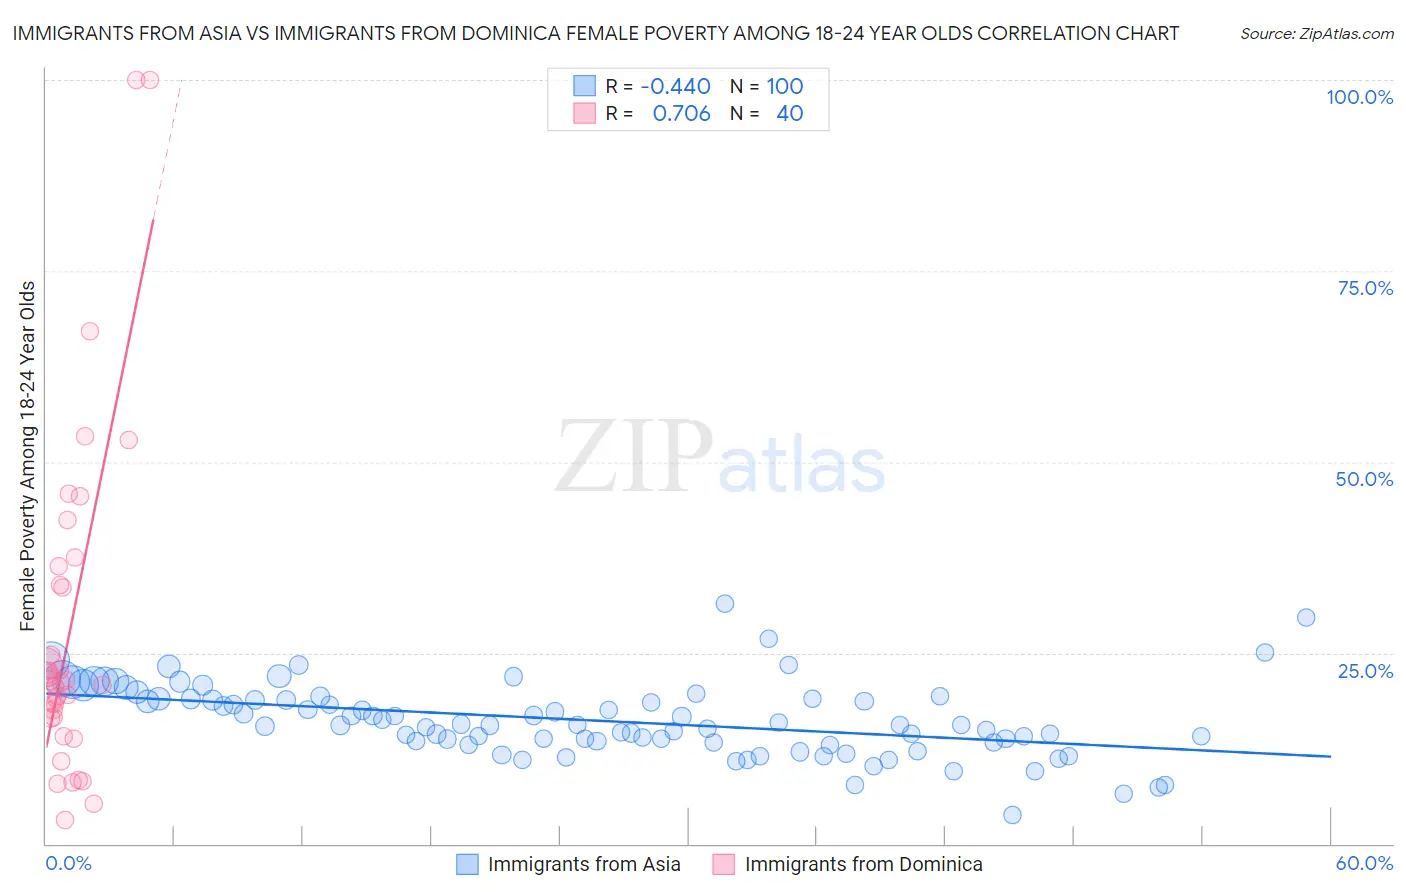 Immigrants from Asia vs Immigrants from Dominica Female Poverty Among 18-24 Year Olds